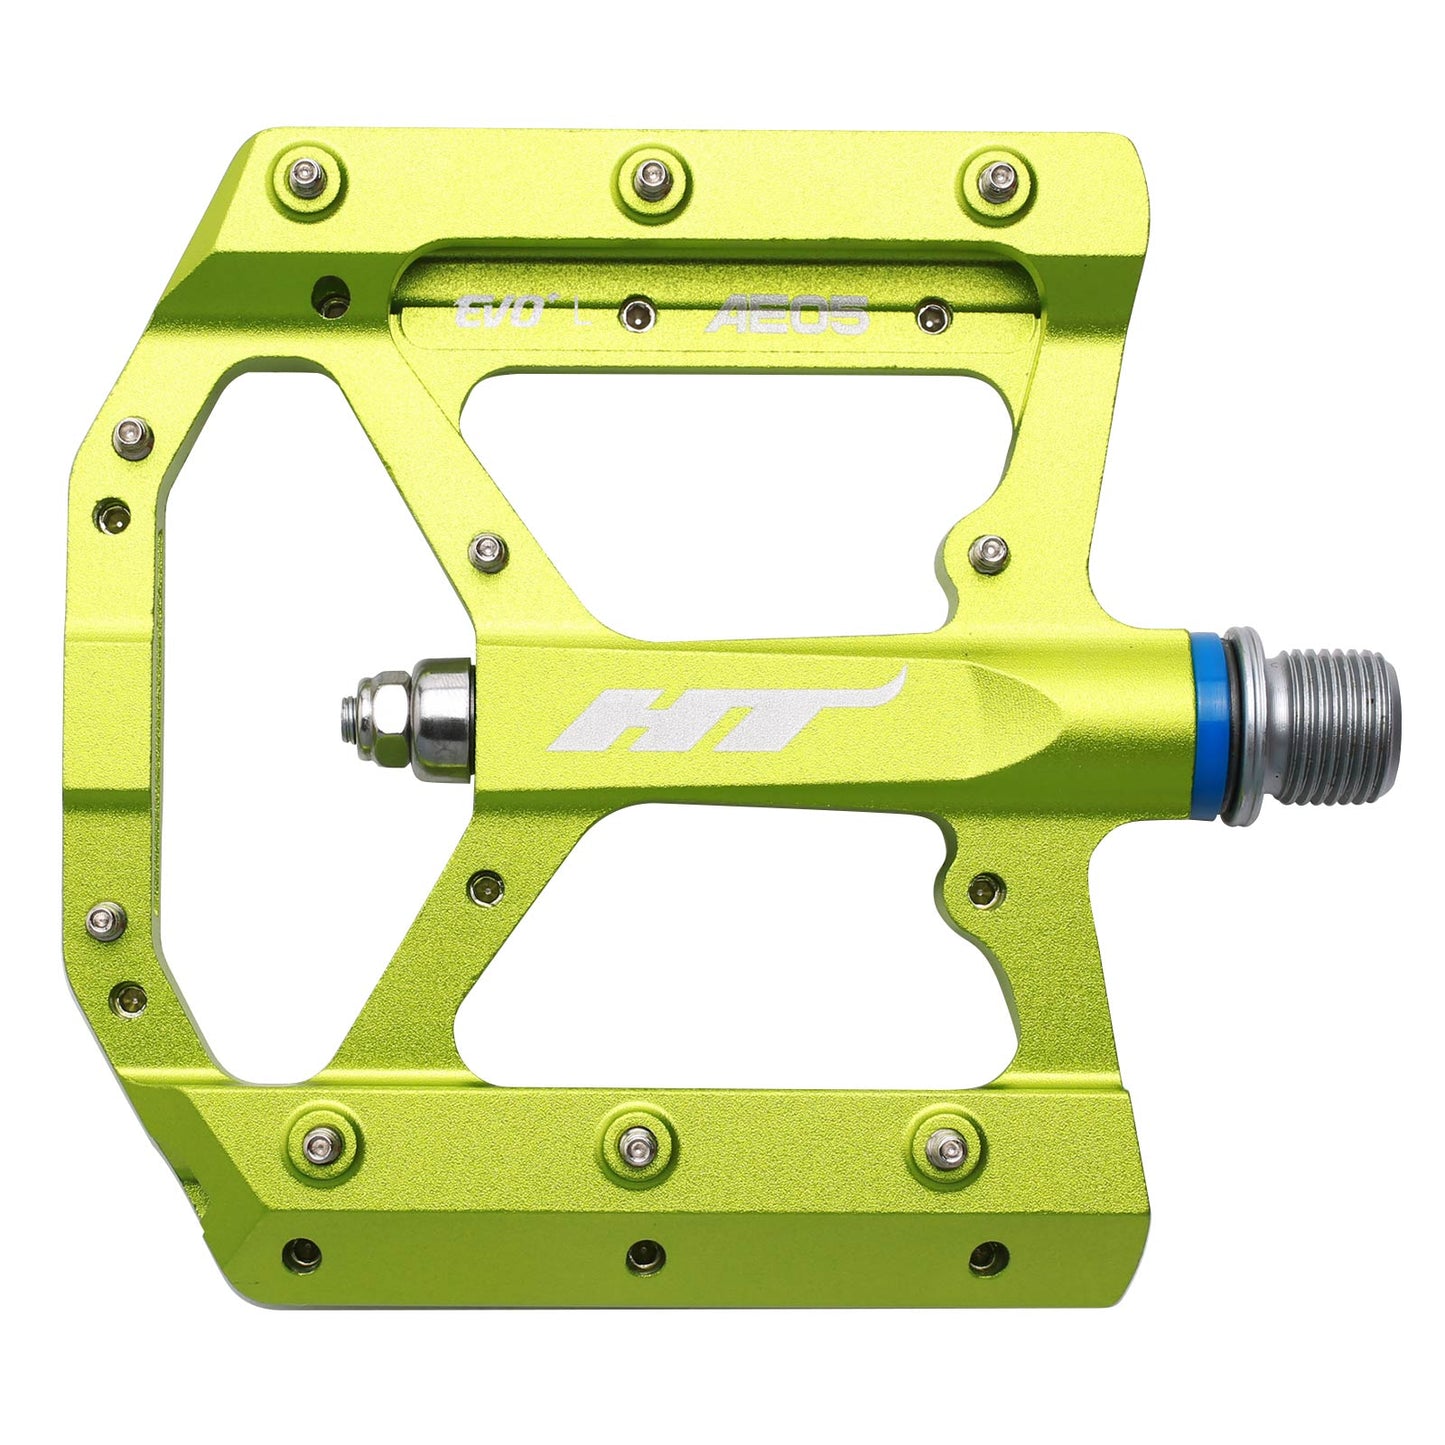 Ht AE05 Pedals Alloy / CNC CRMO - Apple Green